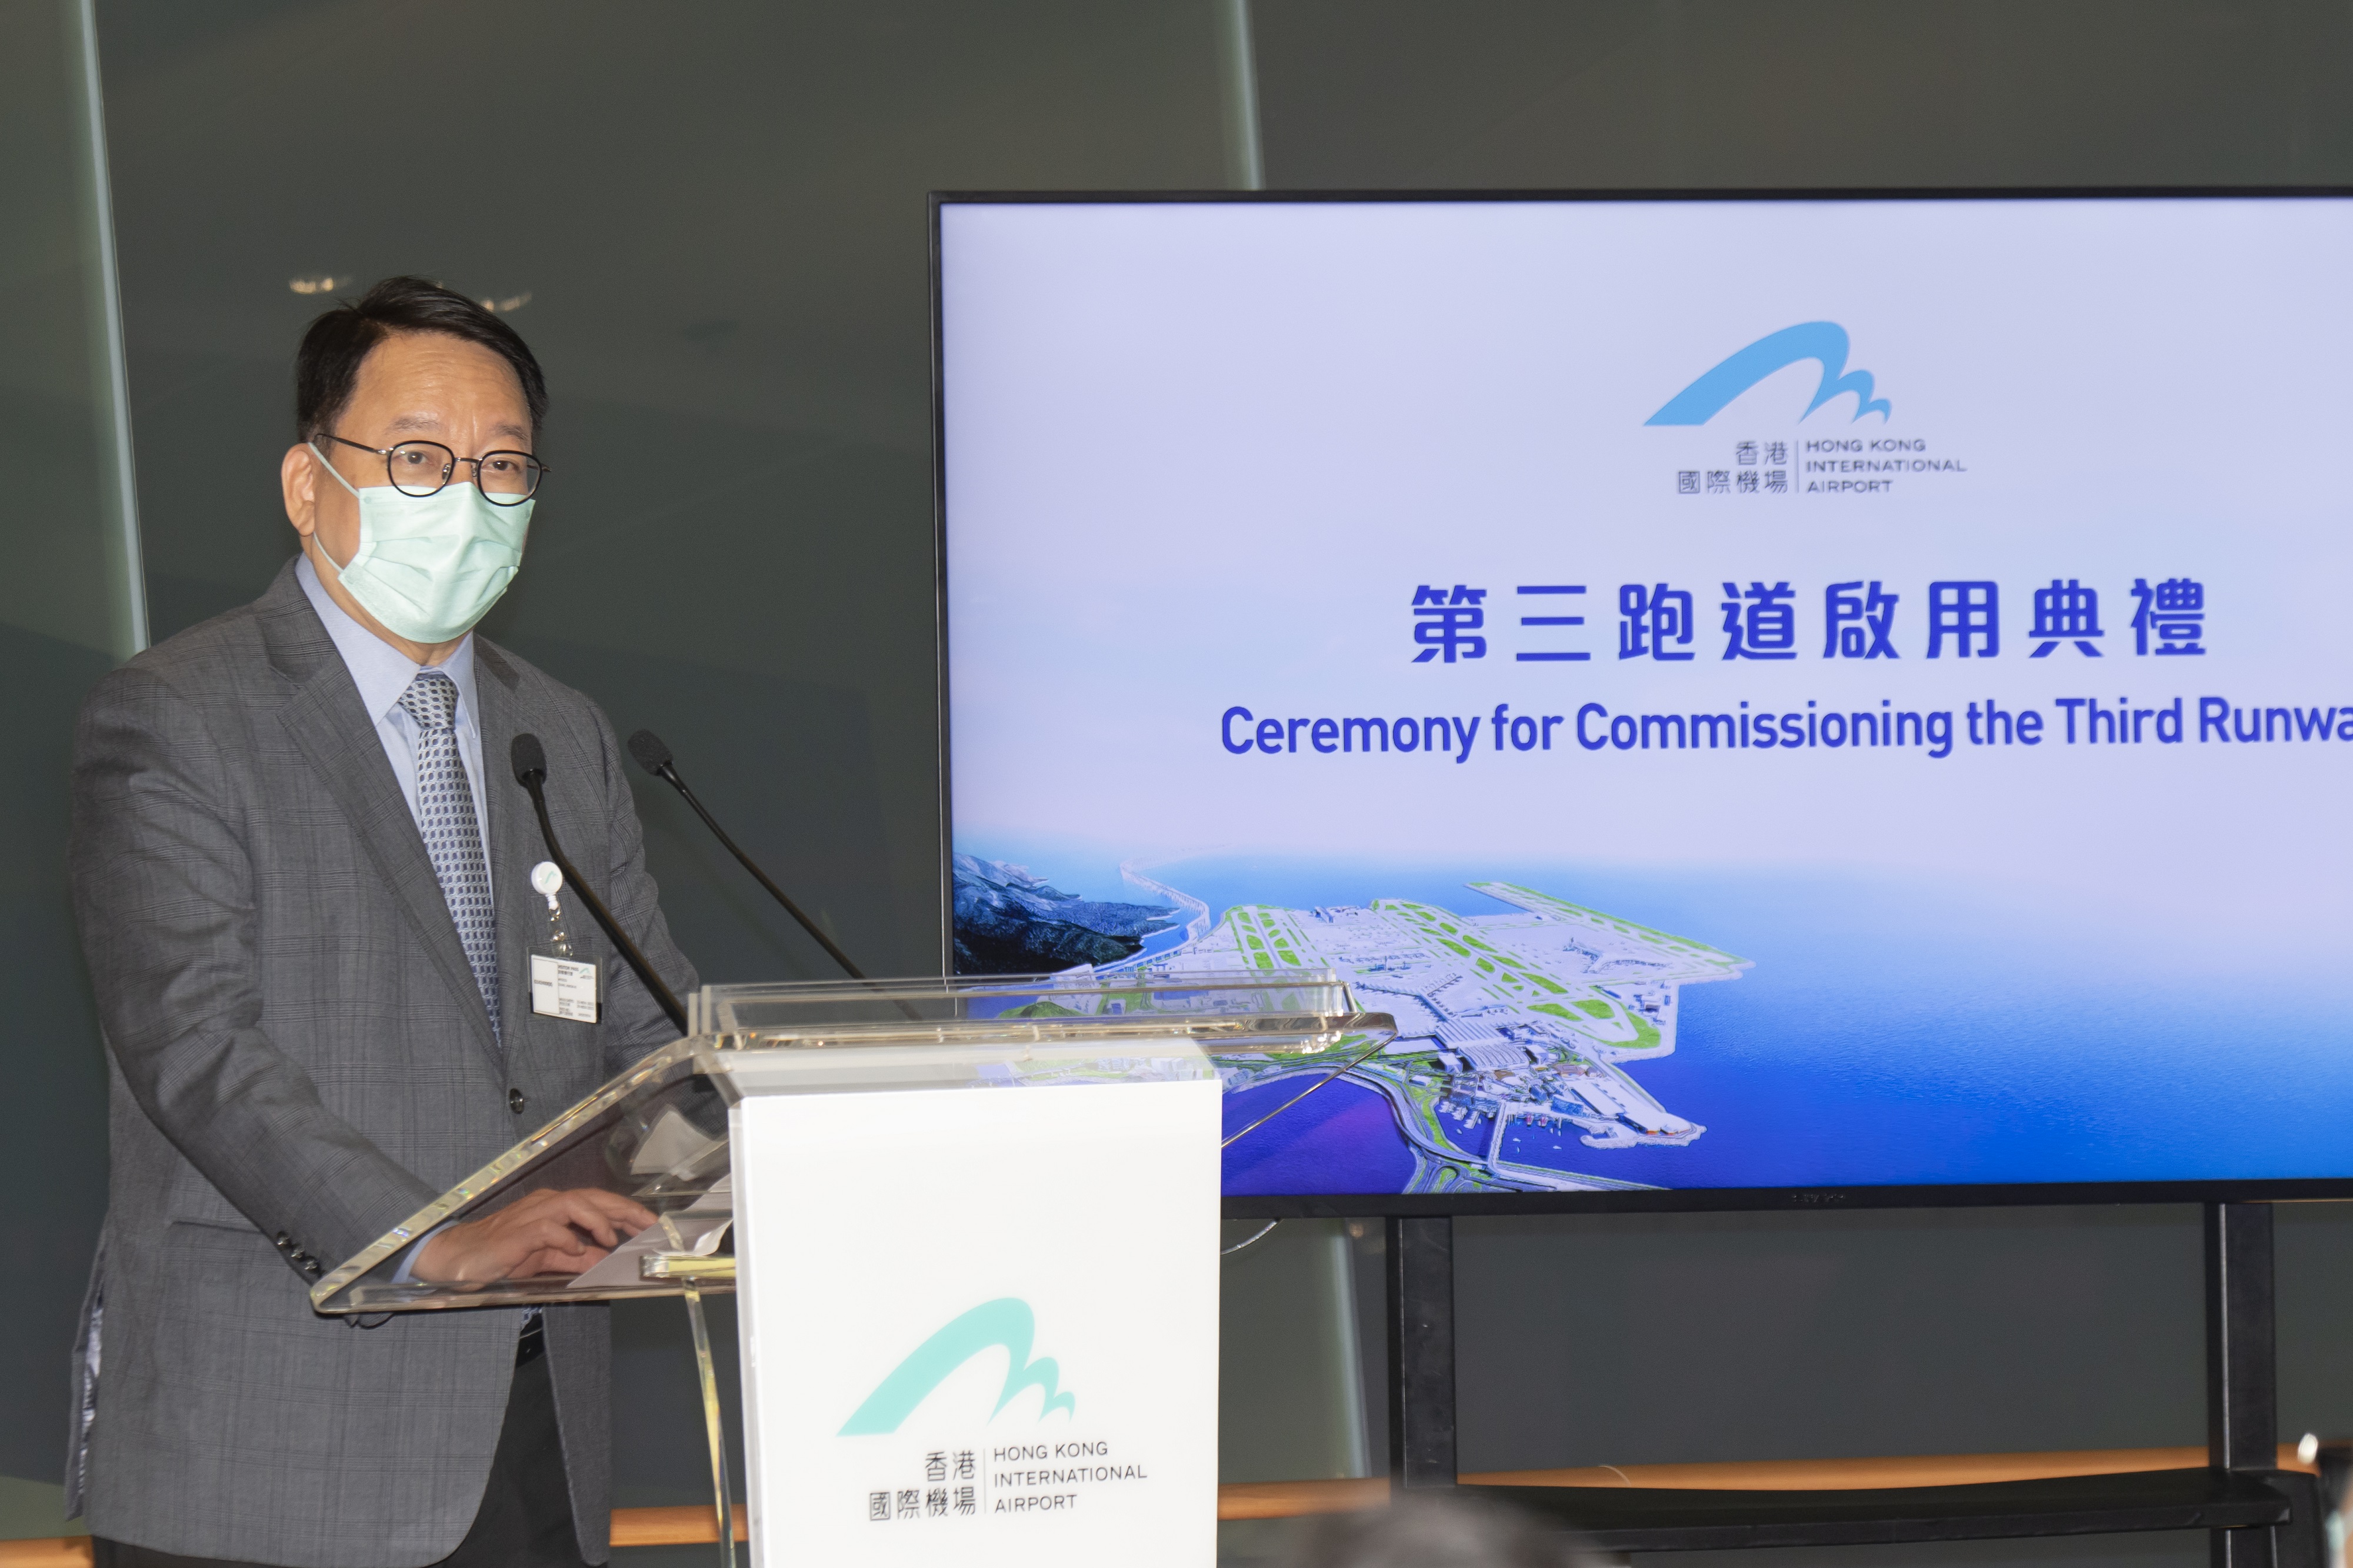 Chan Kwok-ki, Chief Secretary for Administration of HKSAR, remarks at the ceremony that the 3RS will significantly increase the passenger and cargo handling capacity of HKIA. 